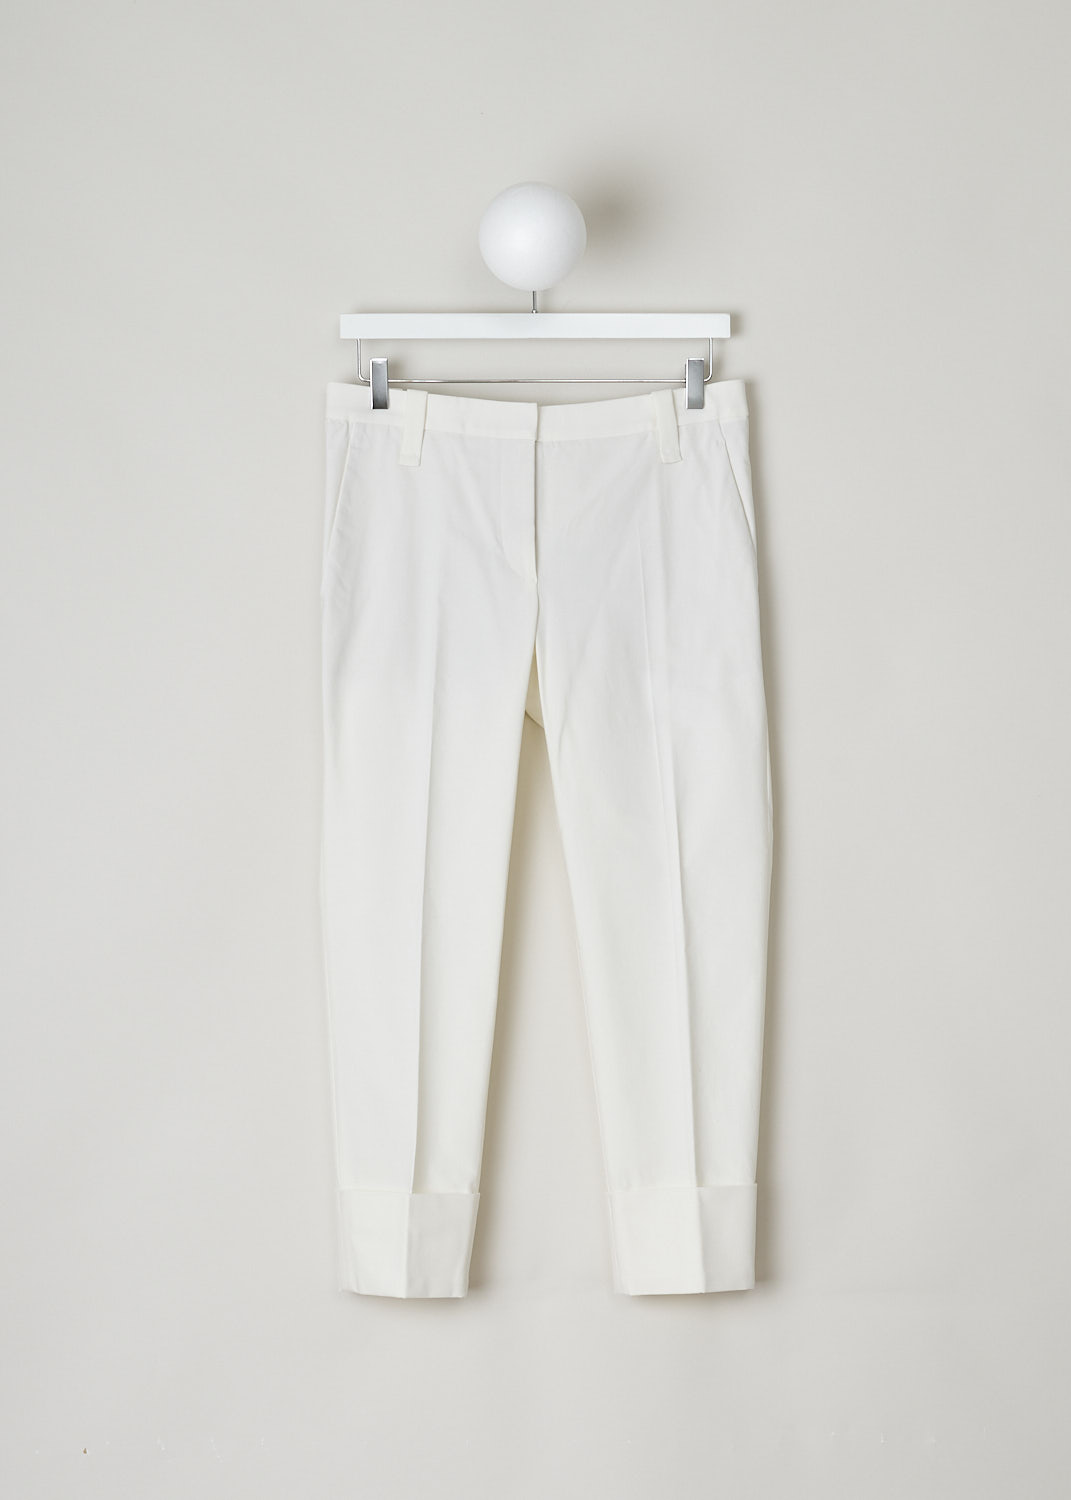 BRUNELLO CUCINELLI, WHITE CHINO WITH FOLD-OVER HEM, M0F70P1367_C7025, White, Front, A white chino made of a cotton blend. Featuring a clasp and zip closure, forward slanted pockets in the front and welt pockets on the back. The belt loops are a bit broader than usual. The pants legs have a folded hem.
